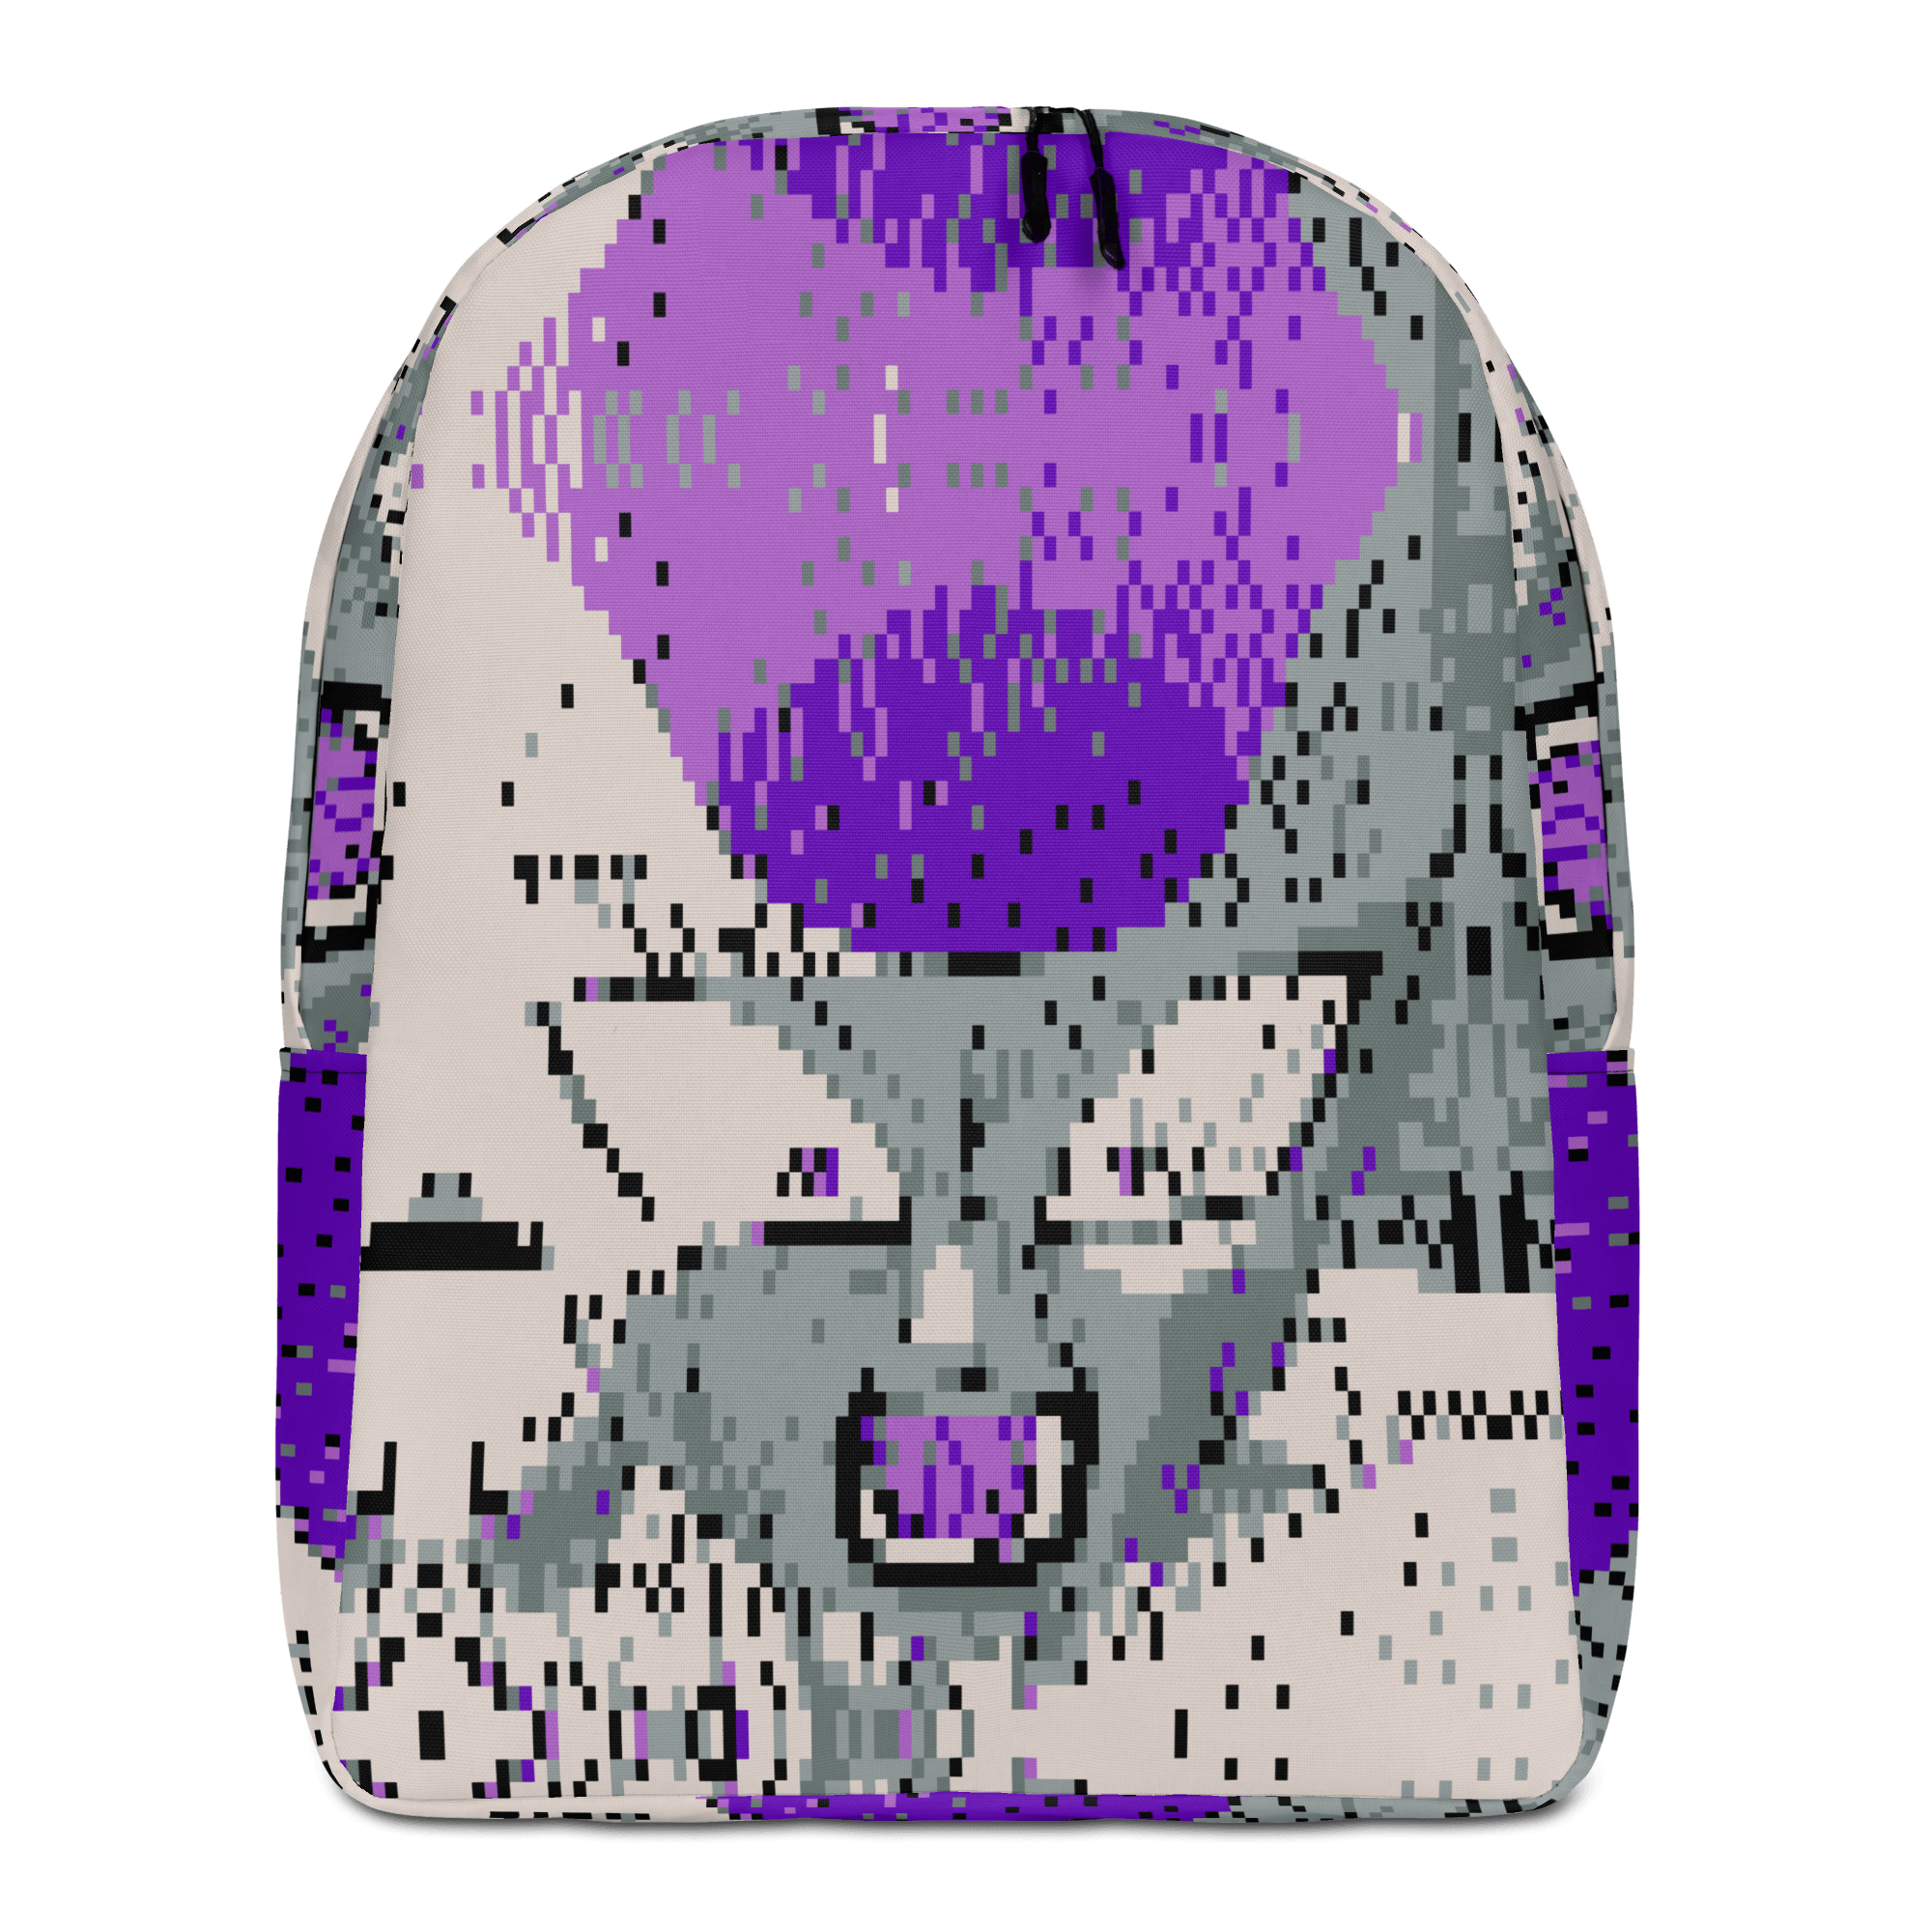 The End® Backpack (limited to 4) - Kikillo Club